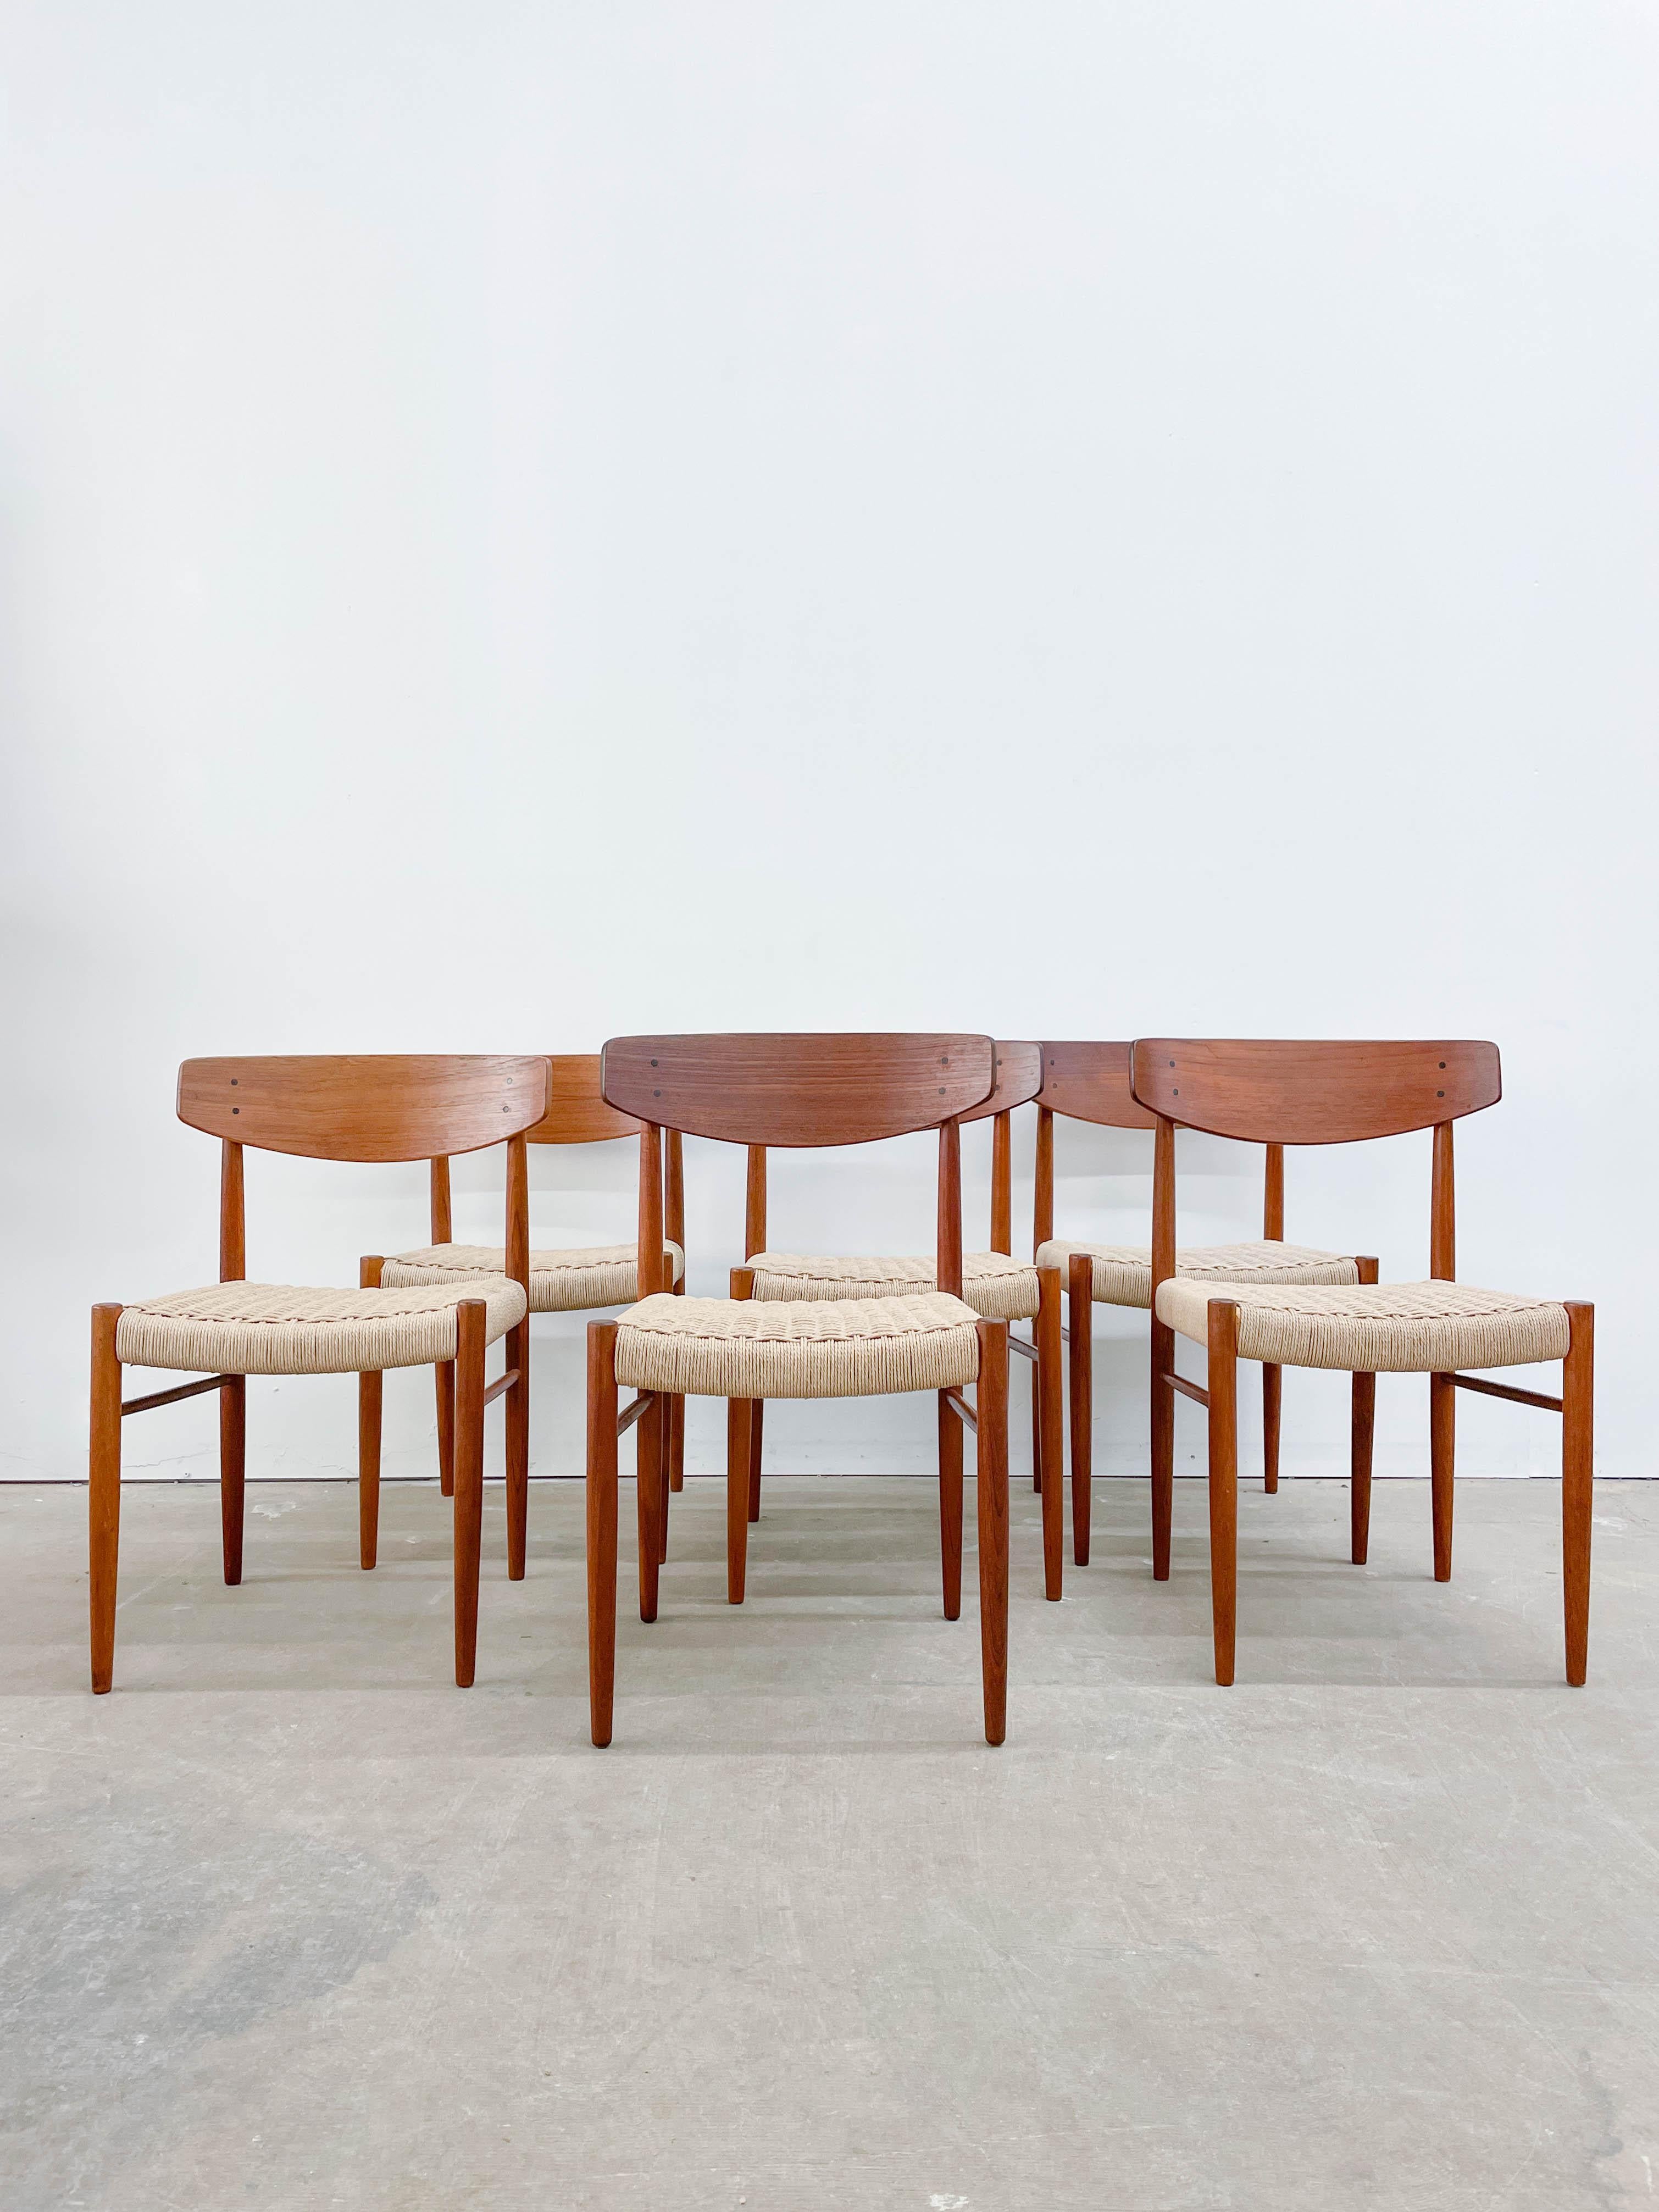 This is a fantastic example of carefully and expertly crafted Danish mid-century modern seating. This set of six newly rewoven and restored dining chairs made by AM Mobler in the 1960s is the definition of classic Danish style. Each chair boasts